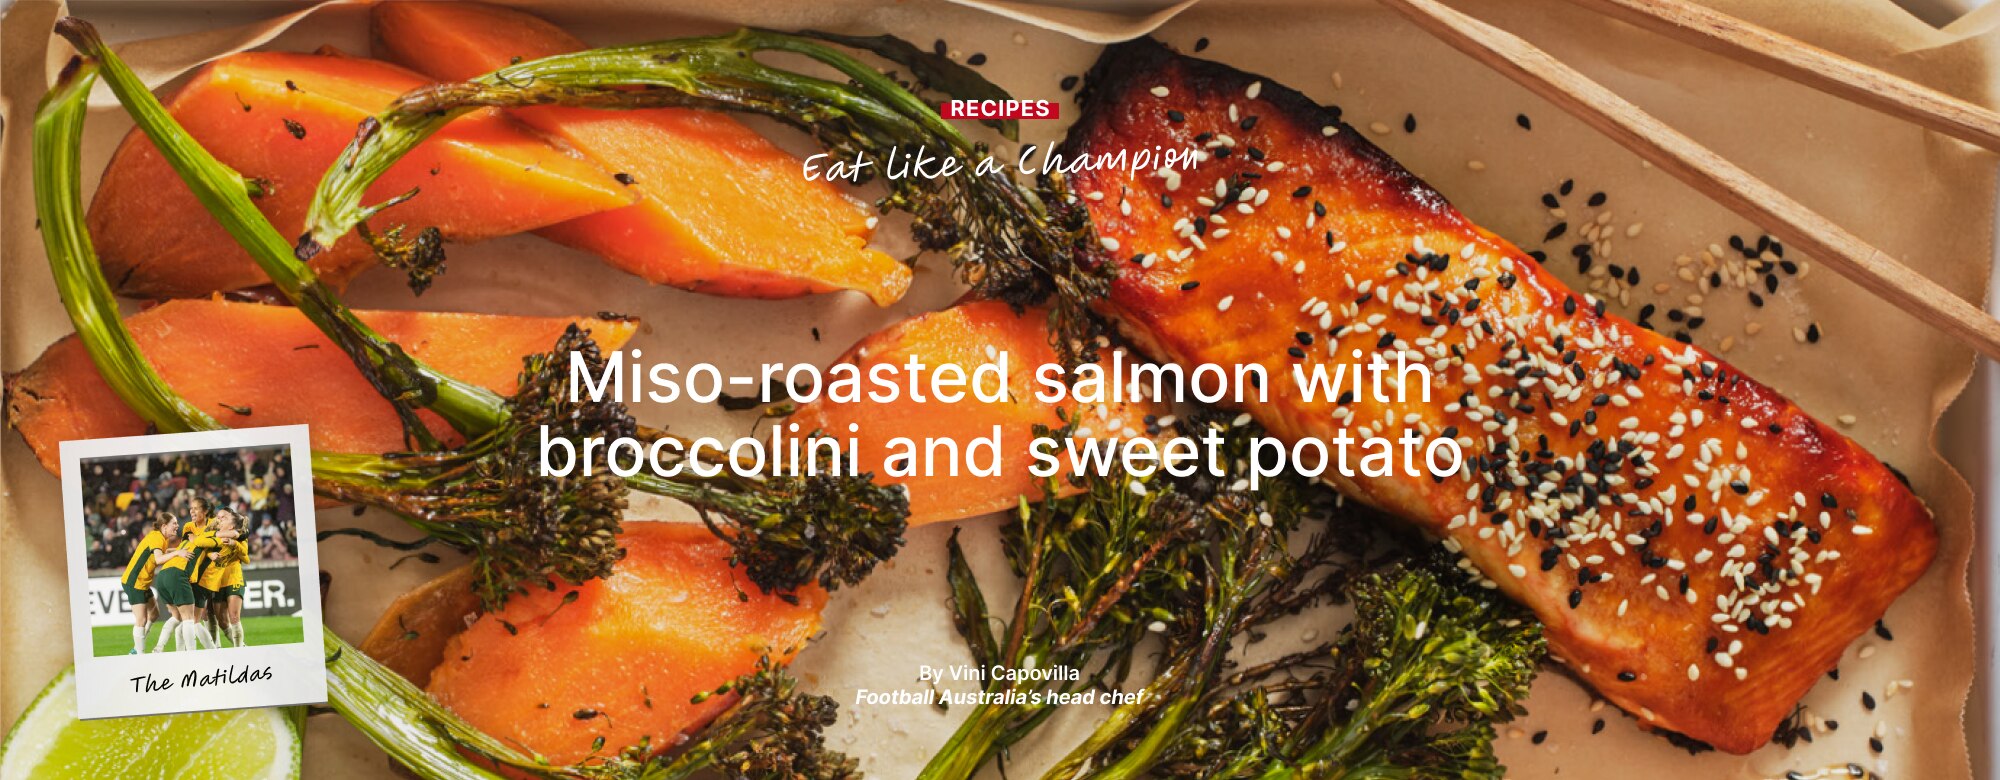 Miso-roasted salmon with broccolini and sweet potato